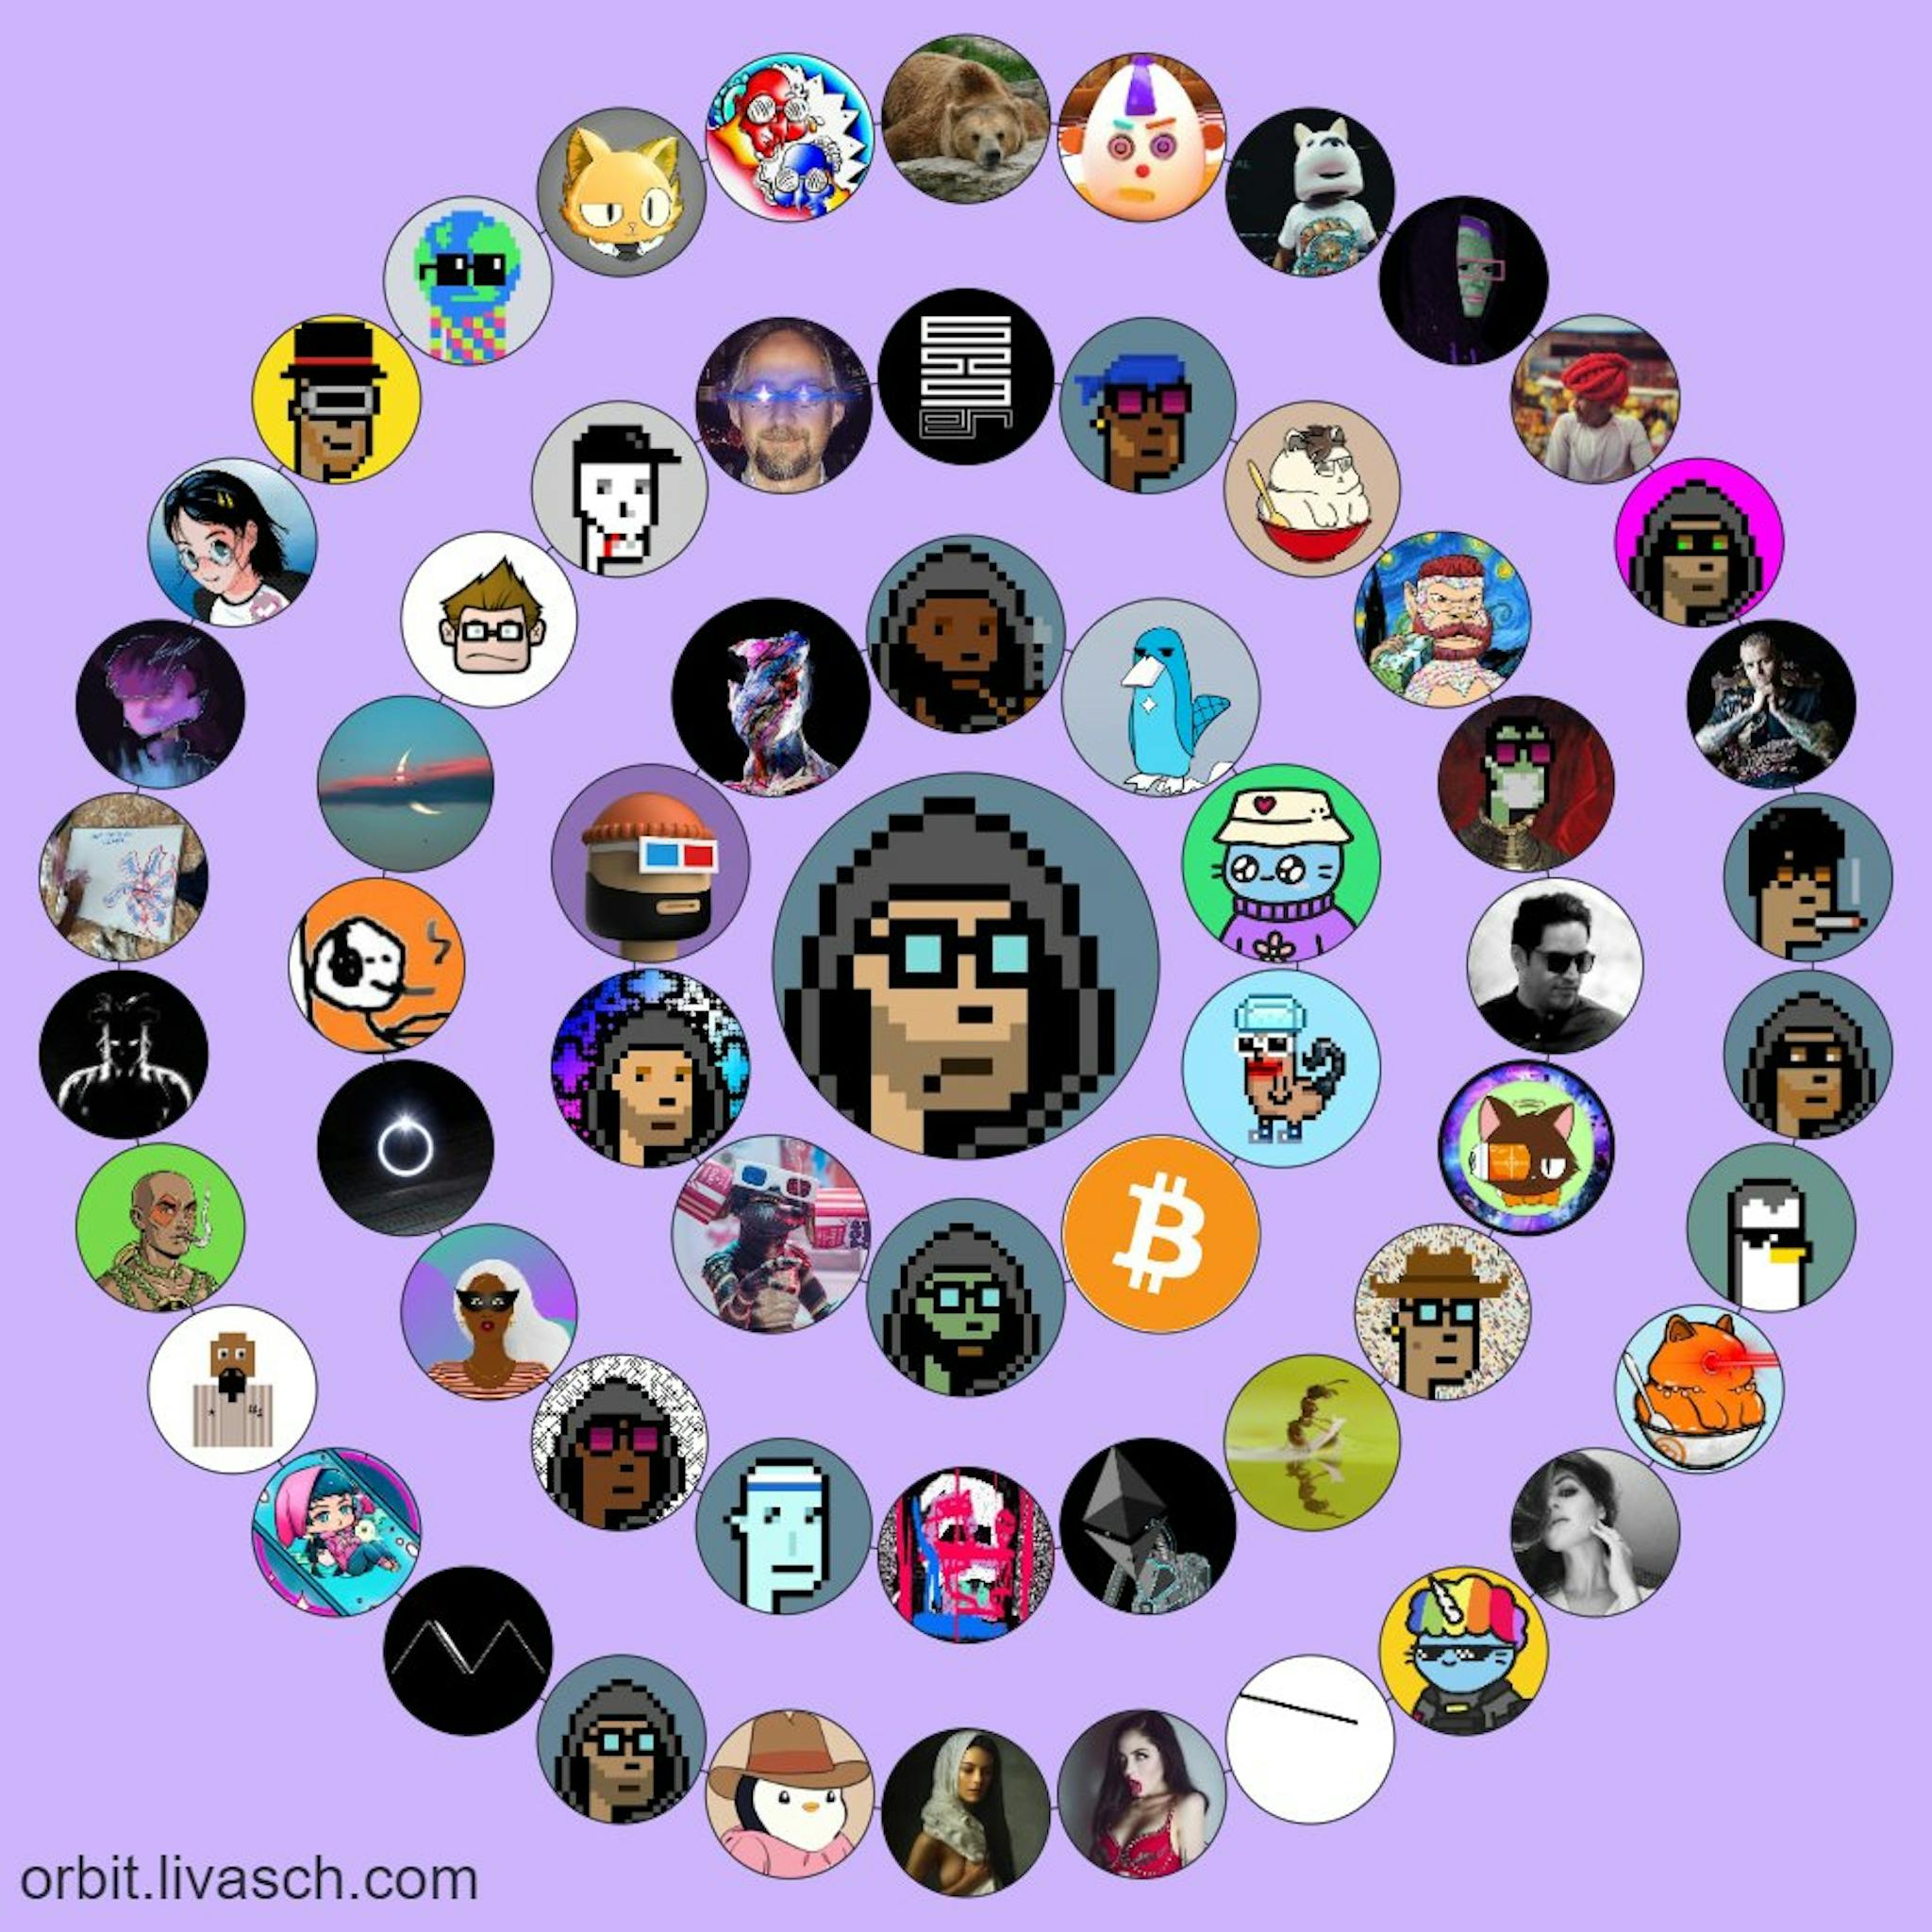 Your circle of friends will start to look like this (source: https://twitter.com/punk6529/status/1450071143780597763)